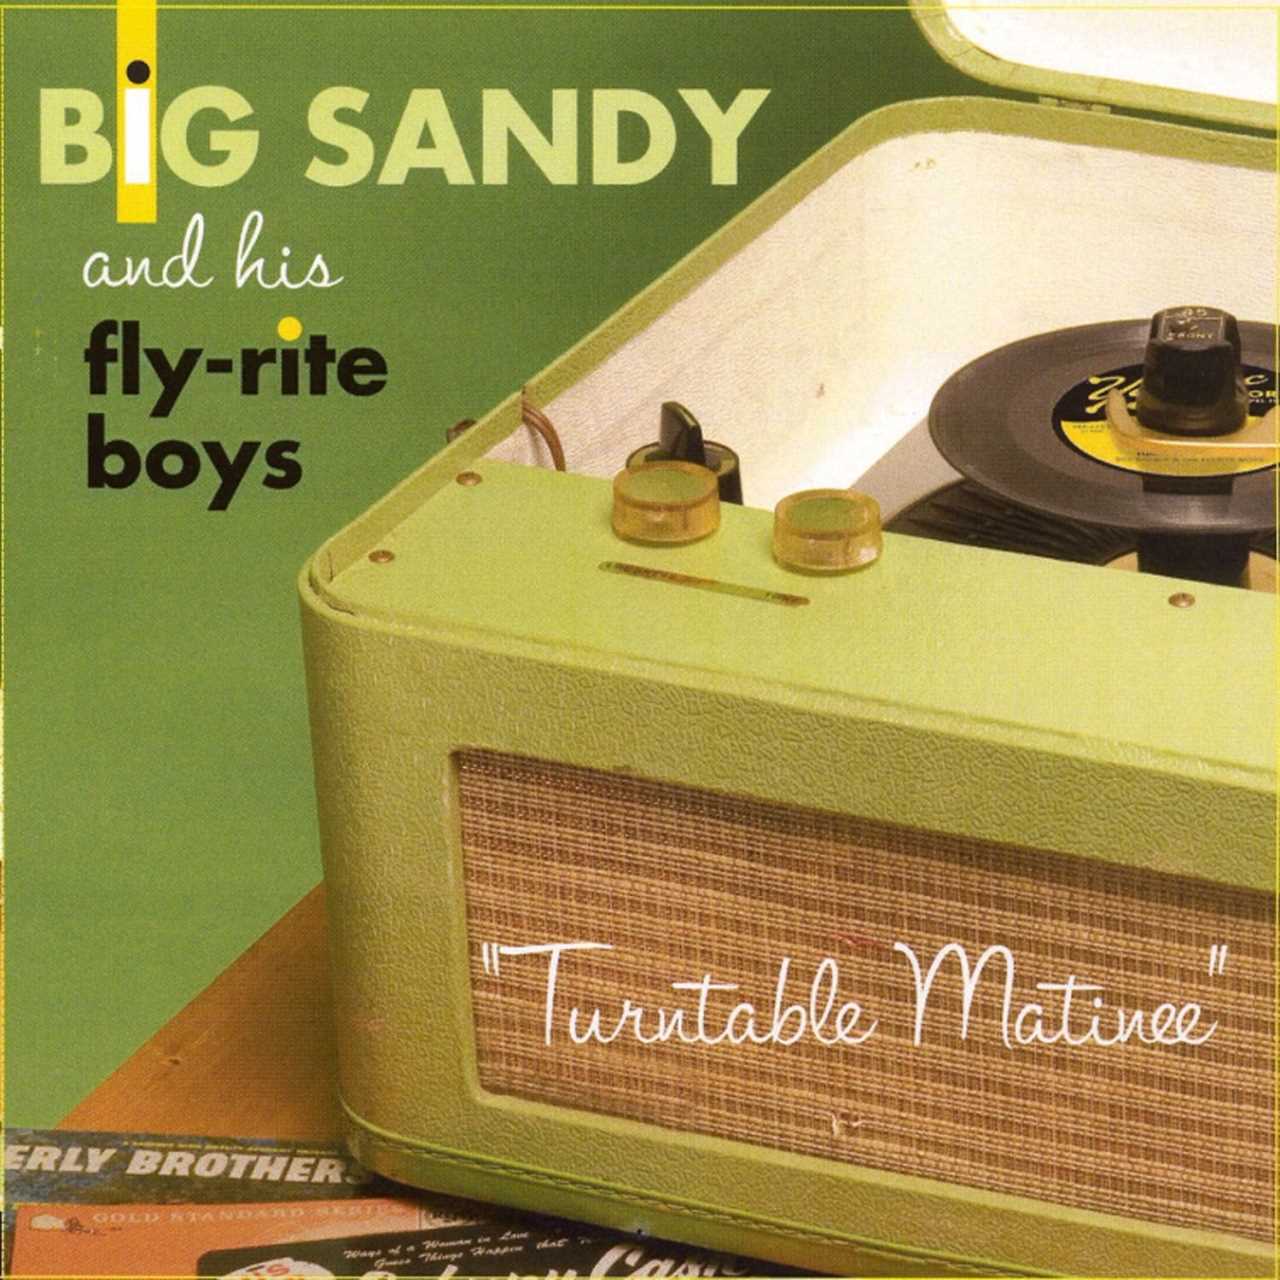 Big Sandy & His Fly-Rite Boys - Turntable Matinee cover album